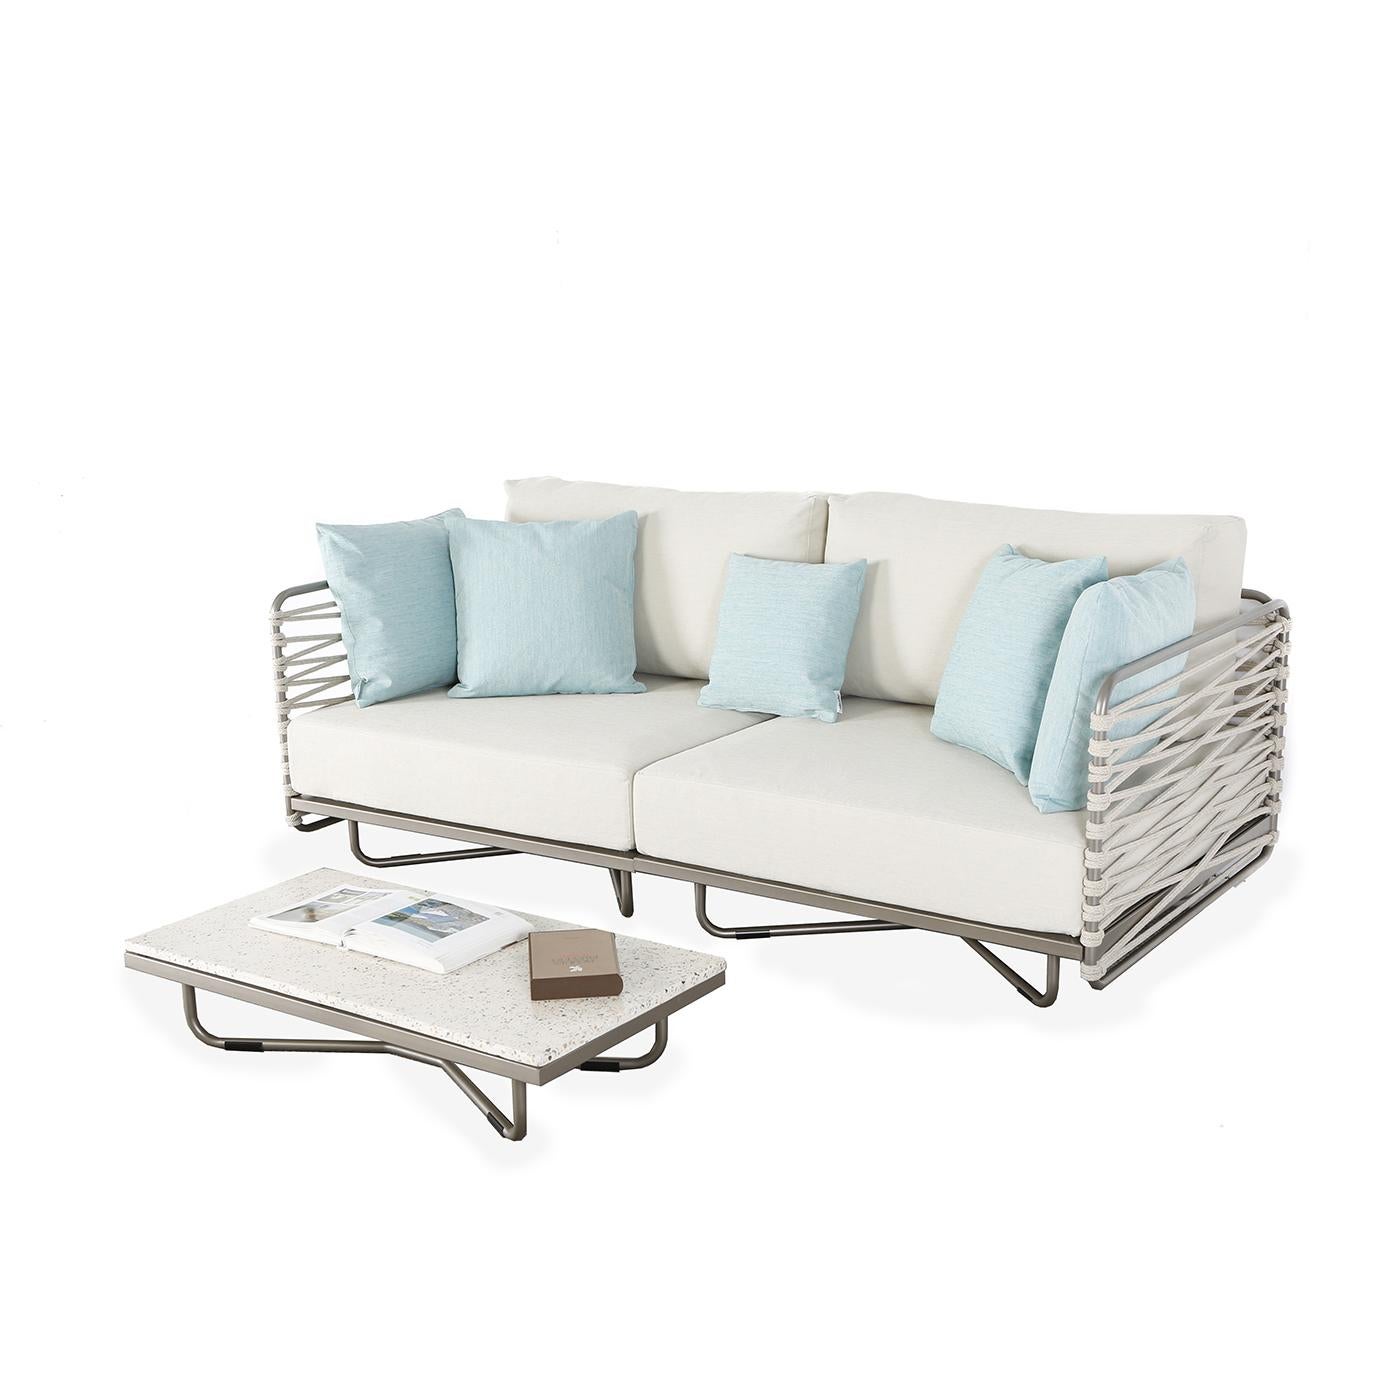 The Forte dei Marmi Sofa channels a coastal vibe with distinct modern undertones, sporting a sturdy steel structure with a sleek lacquered finish. Rope sides exude a rustic feel, whilst adding depth and texture. Its padded seat and backrest cushions